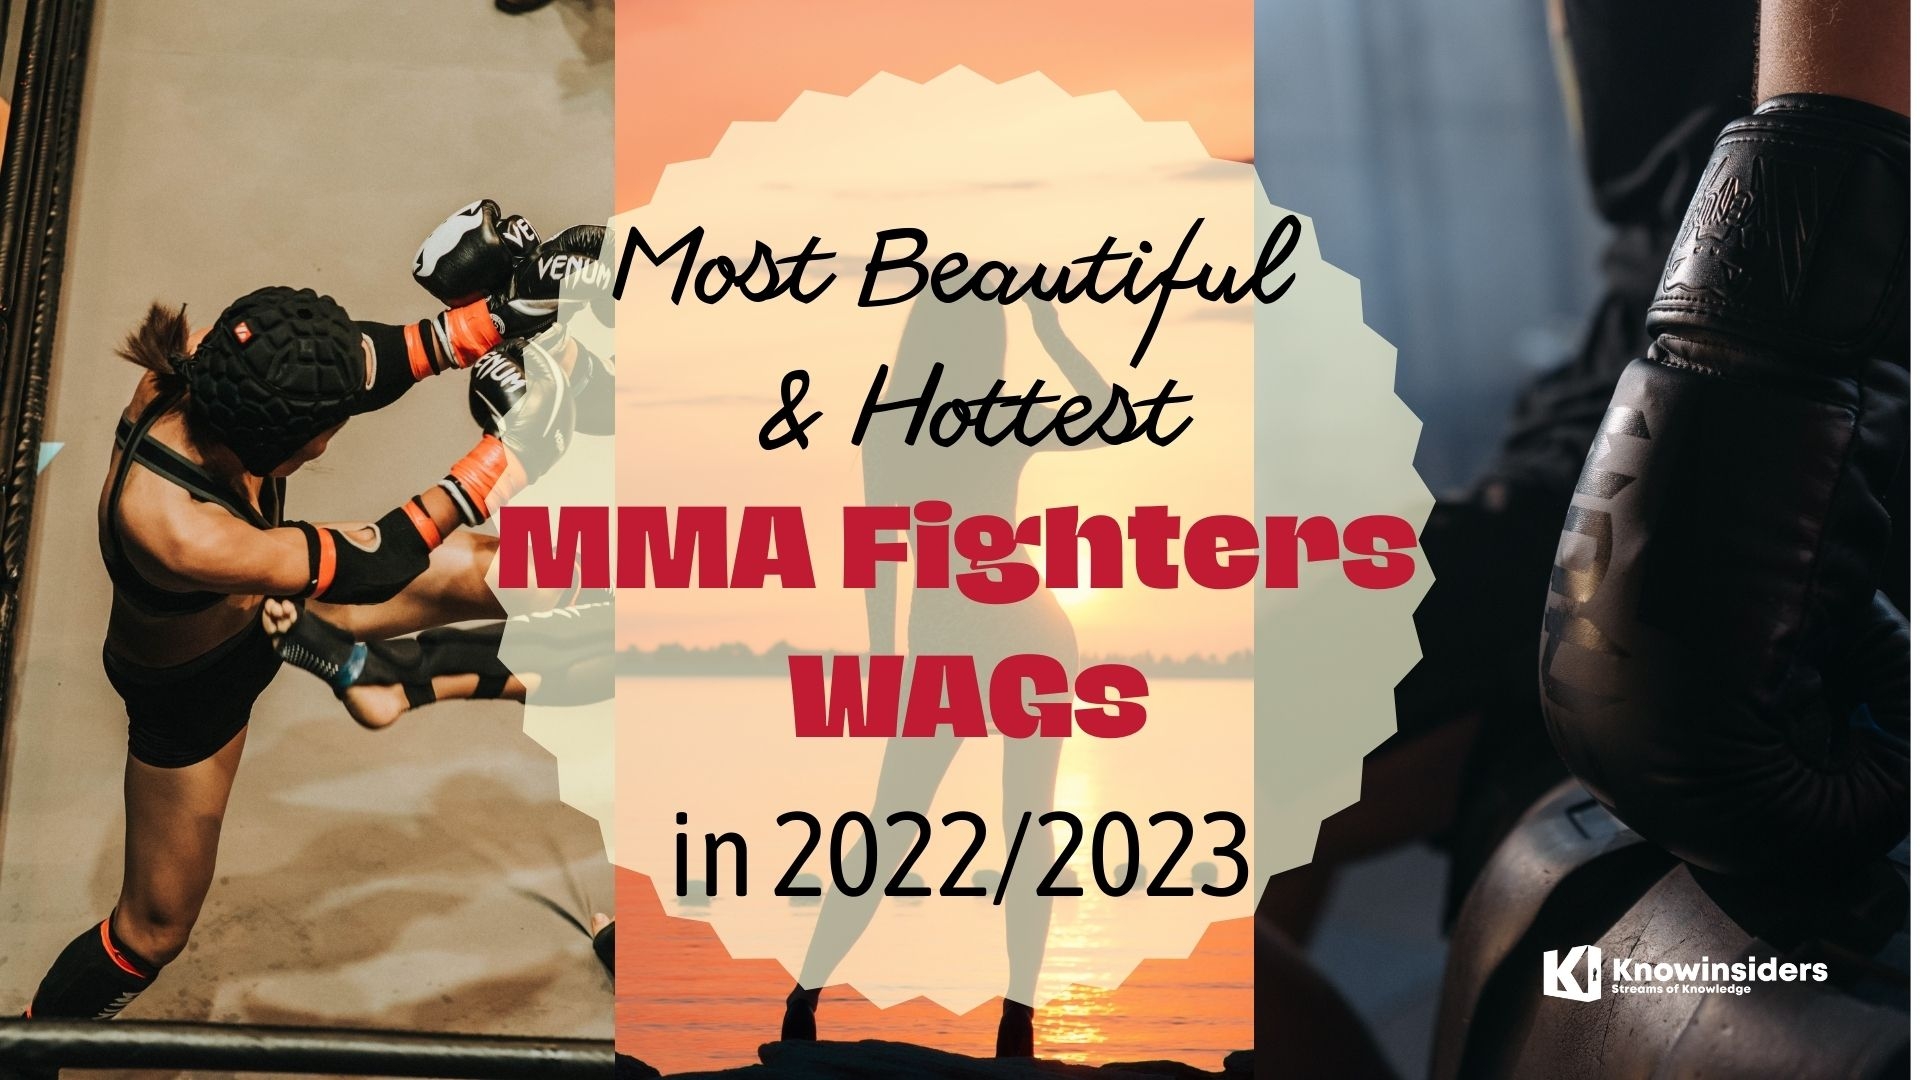 Top 10 Most Beautiful & Hottest MMA Fighter WAGs 2022/2023